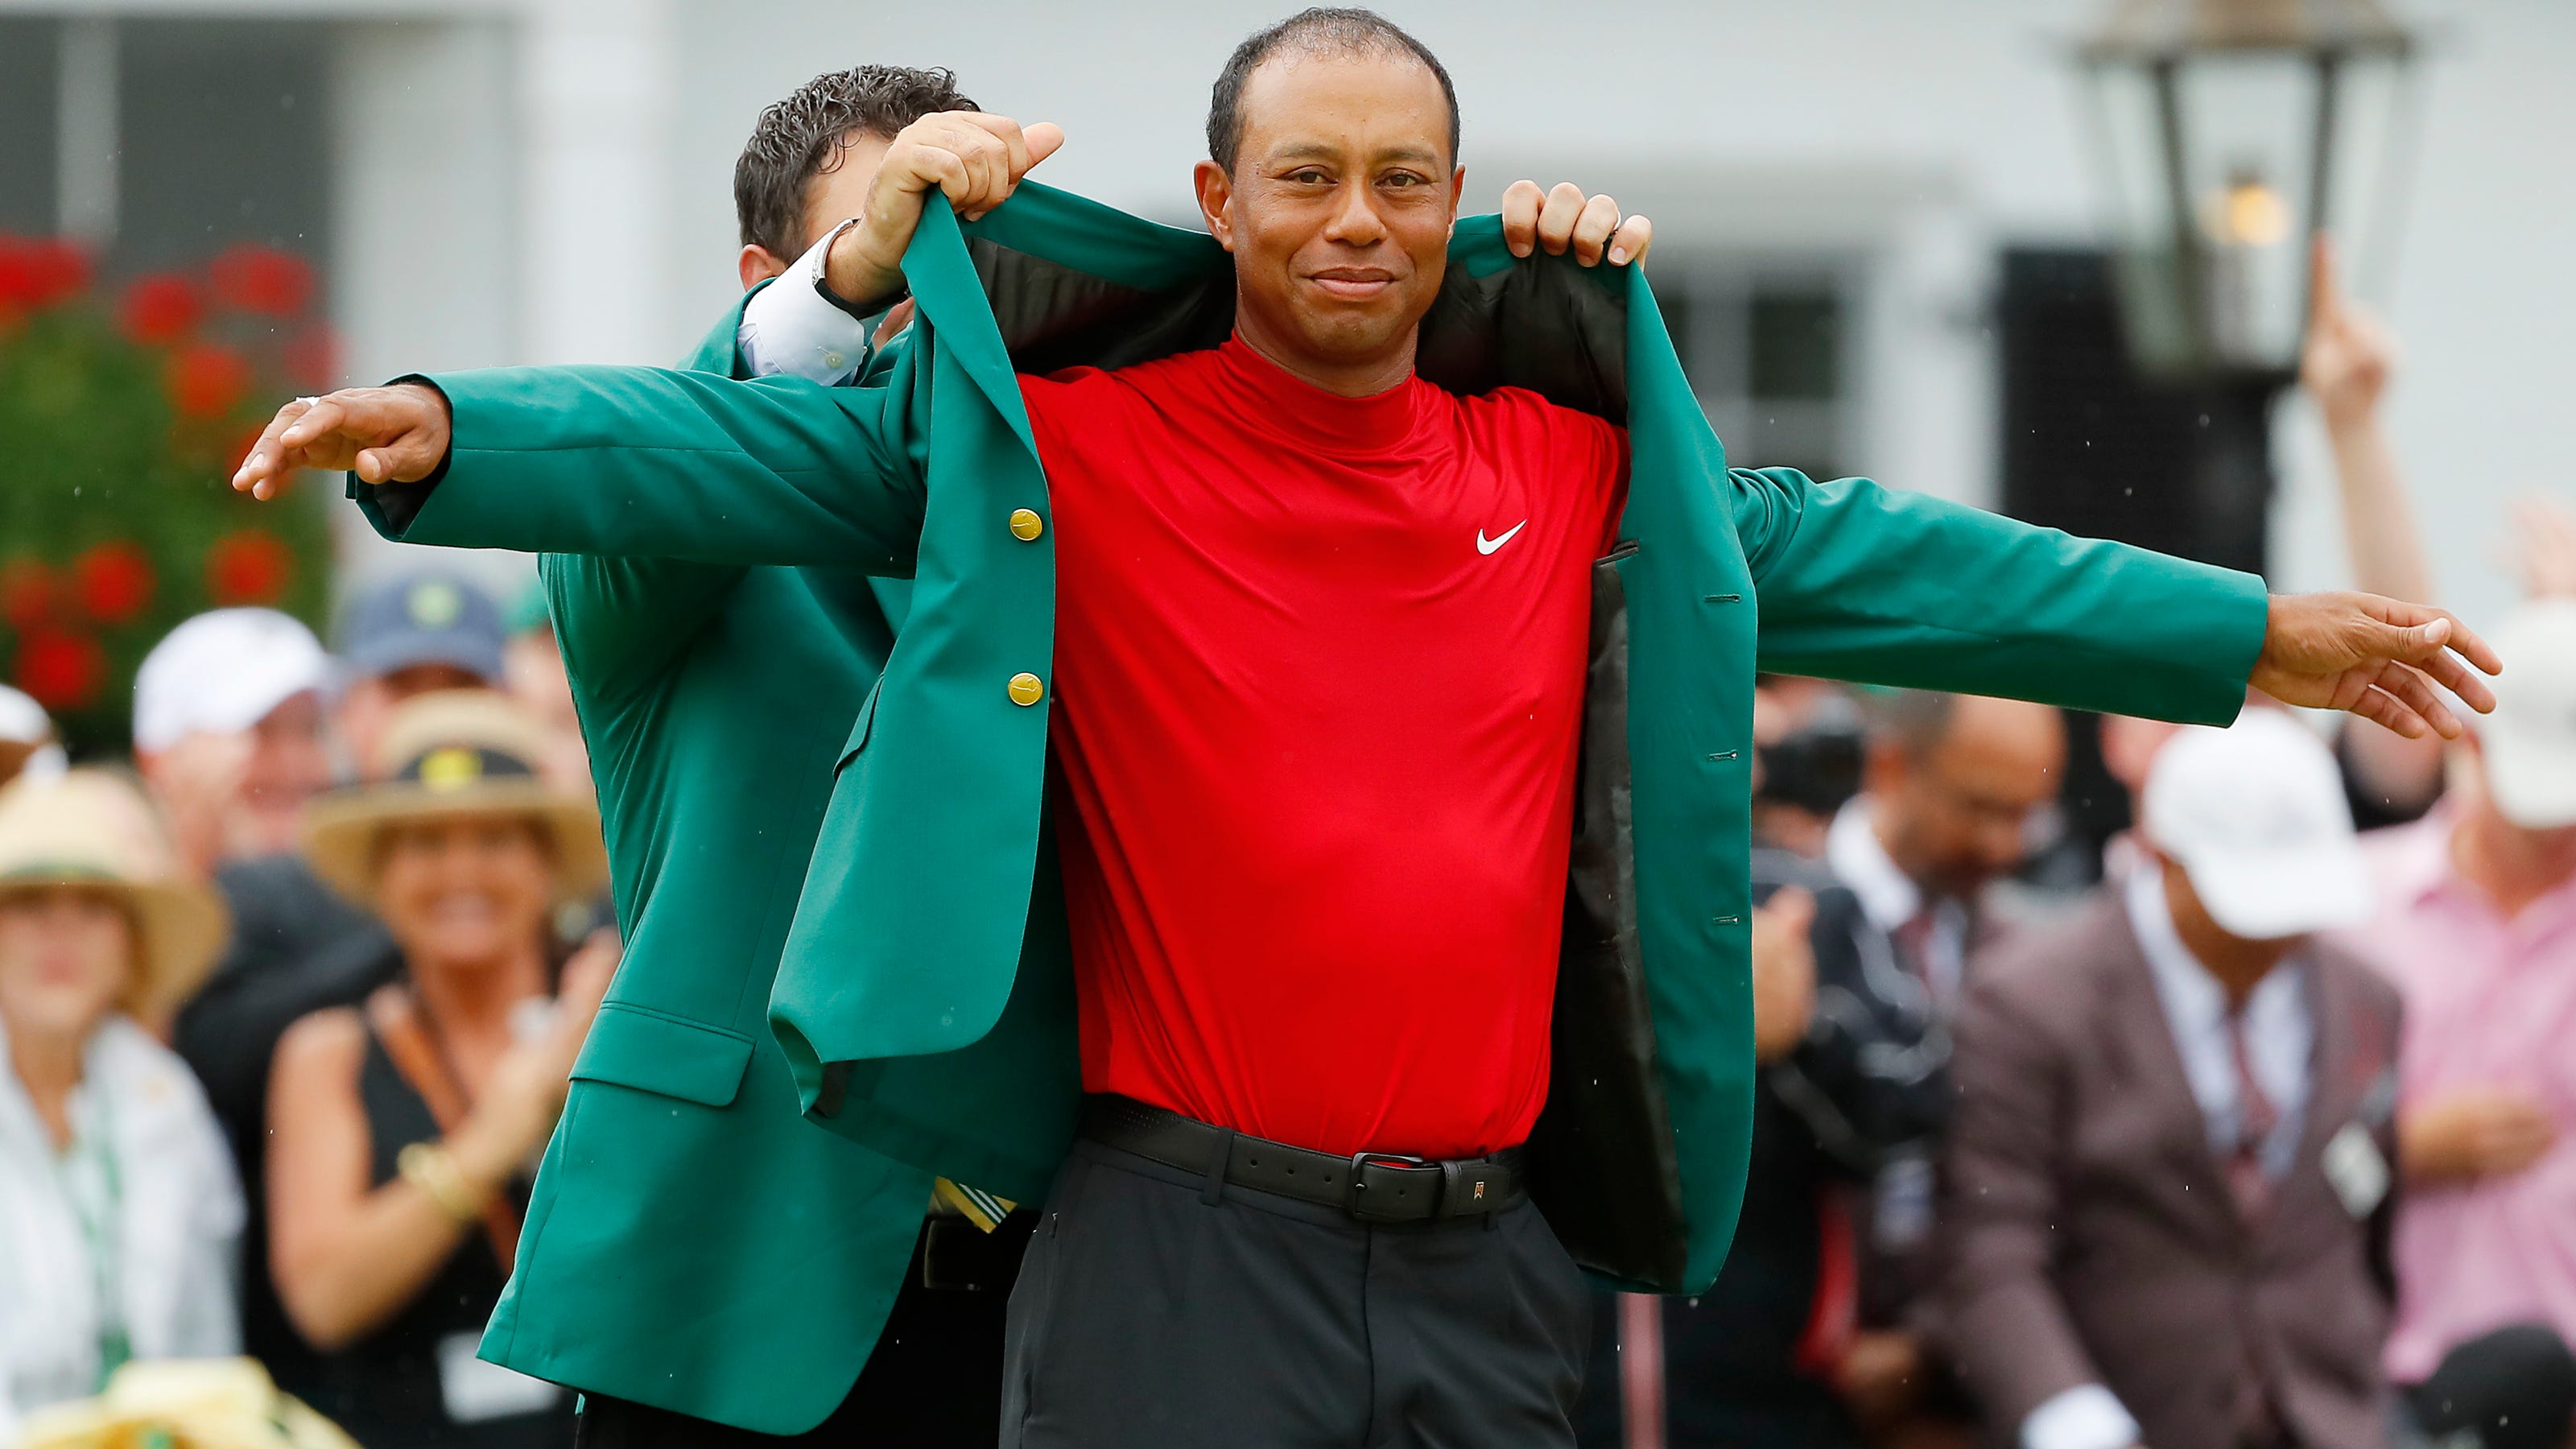 Tigers Woods wins 2019 Masters, 15th major, completes epic comeback